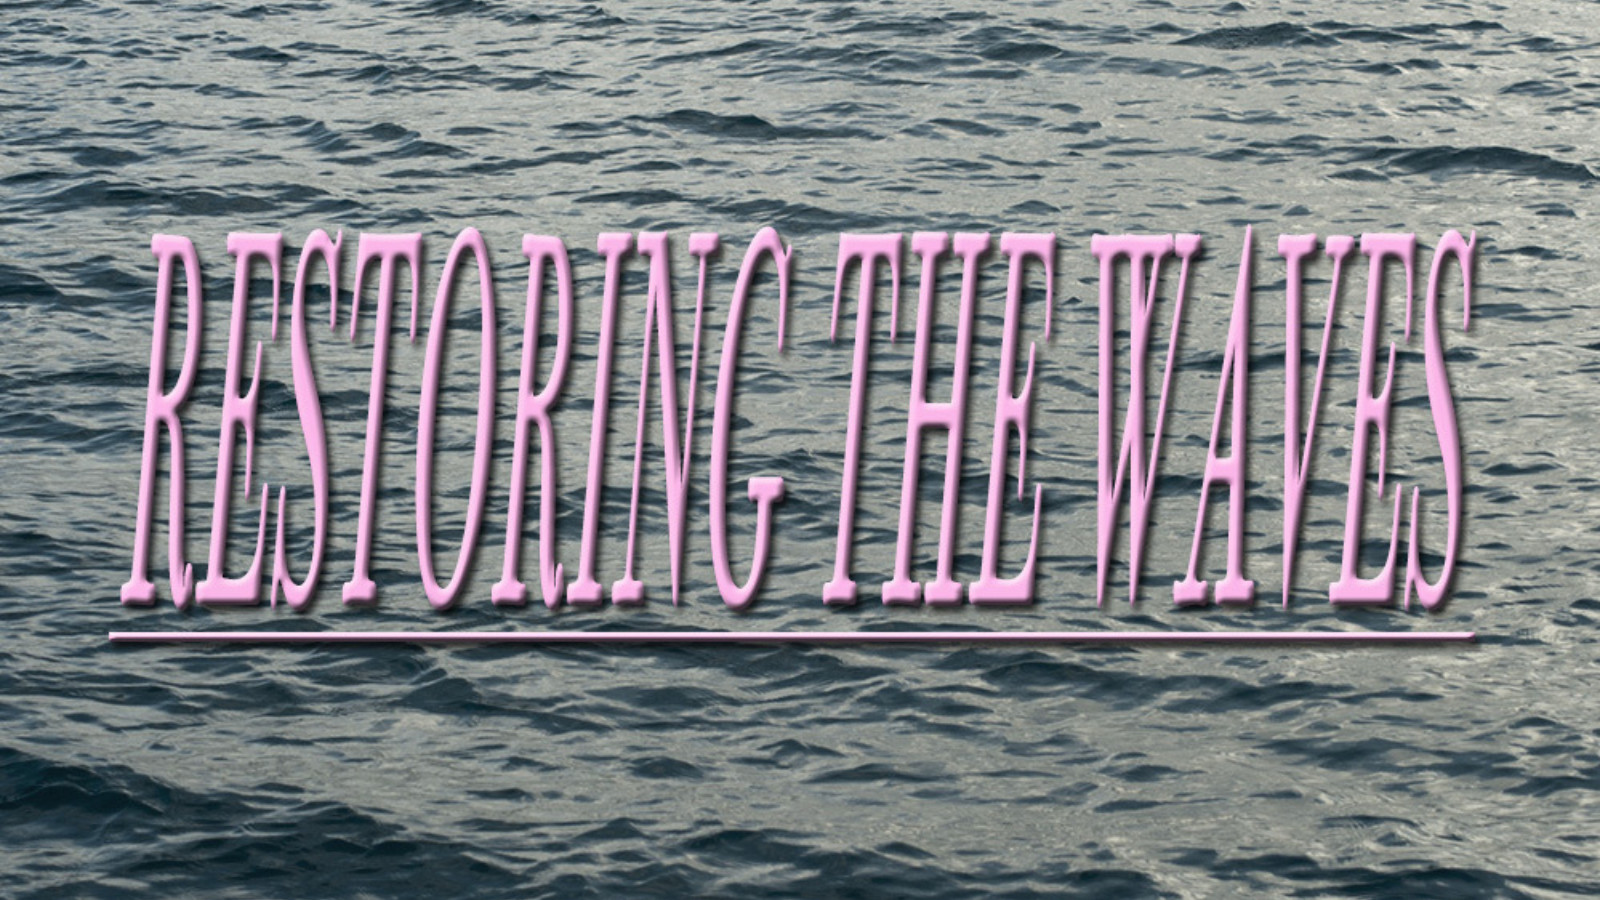 On a background of a dark grey/blue sea the words 'Restoring the Waves' are written in pink capital letters.